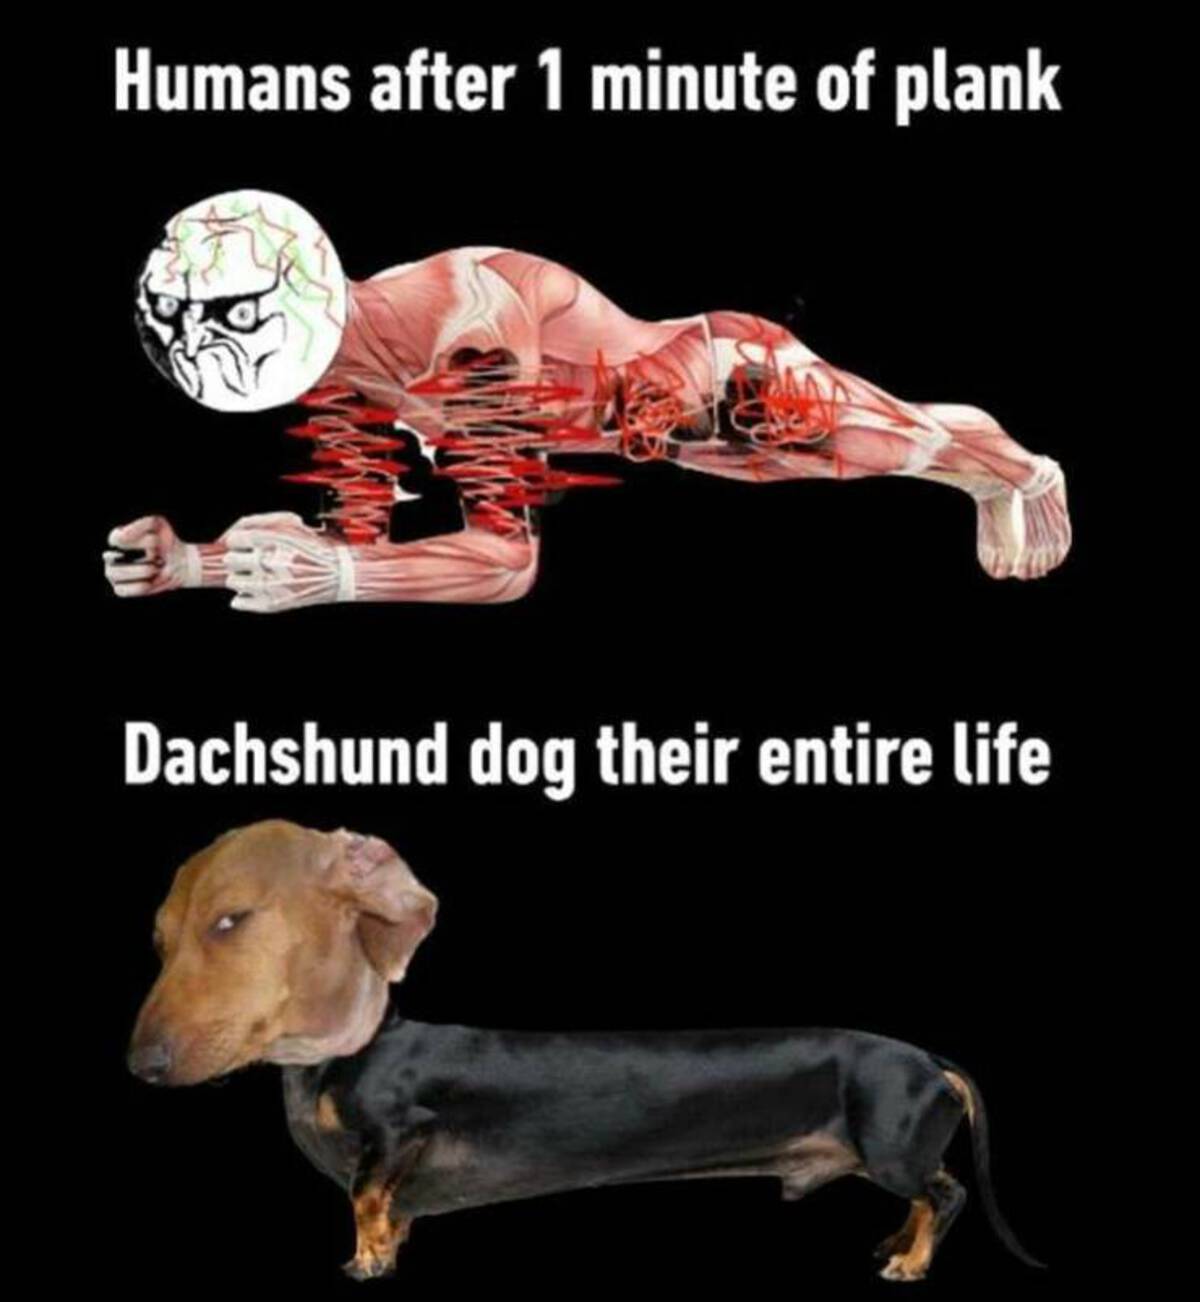 companion dog - Humans after 1 minute of plank Dachshund dog their entire life